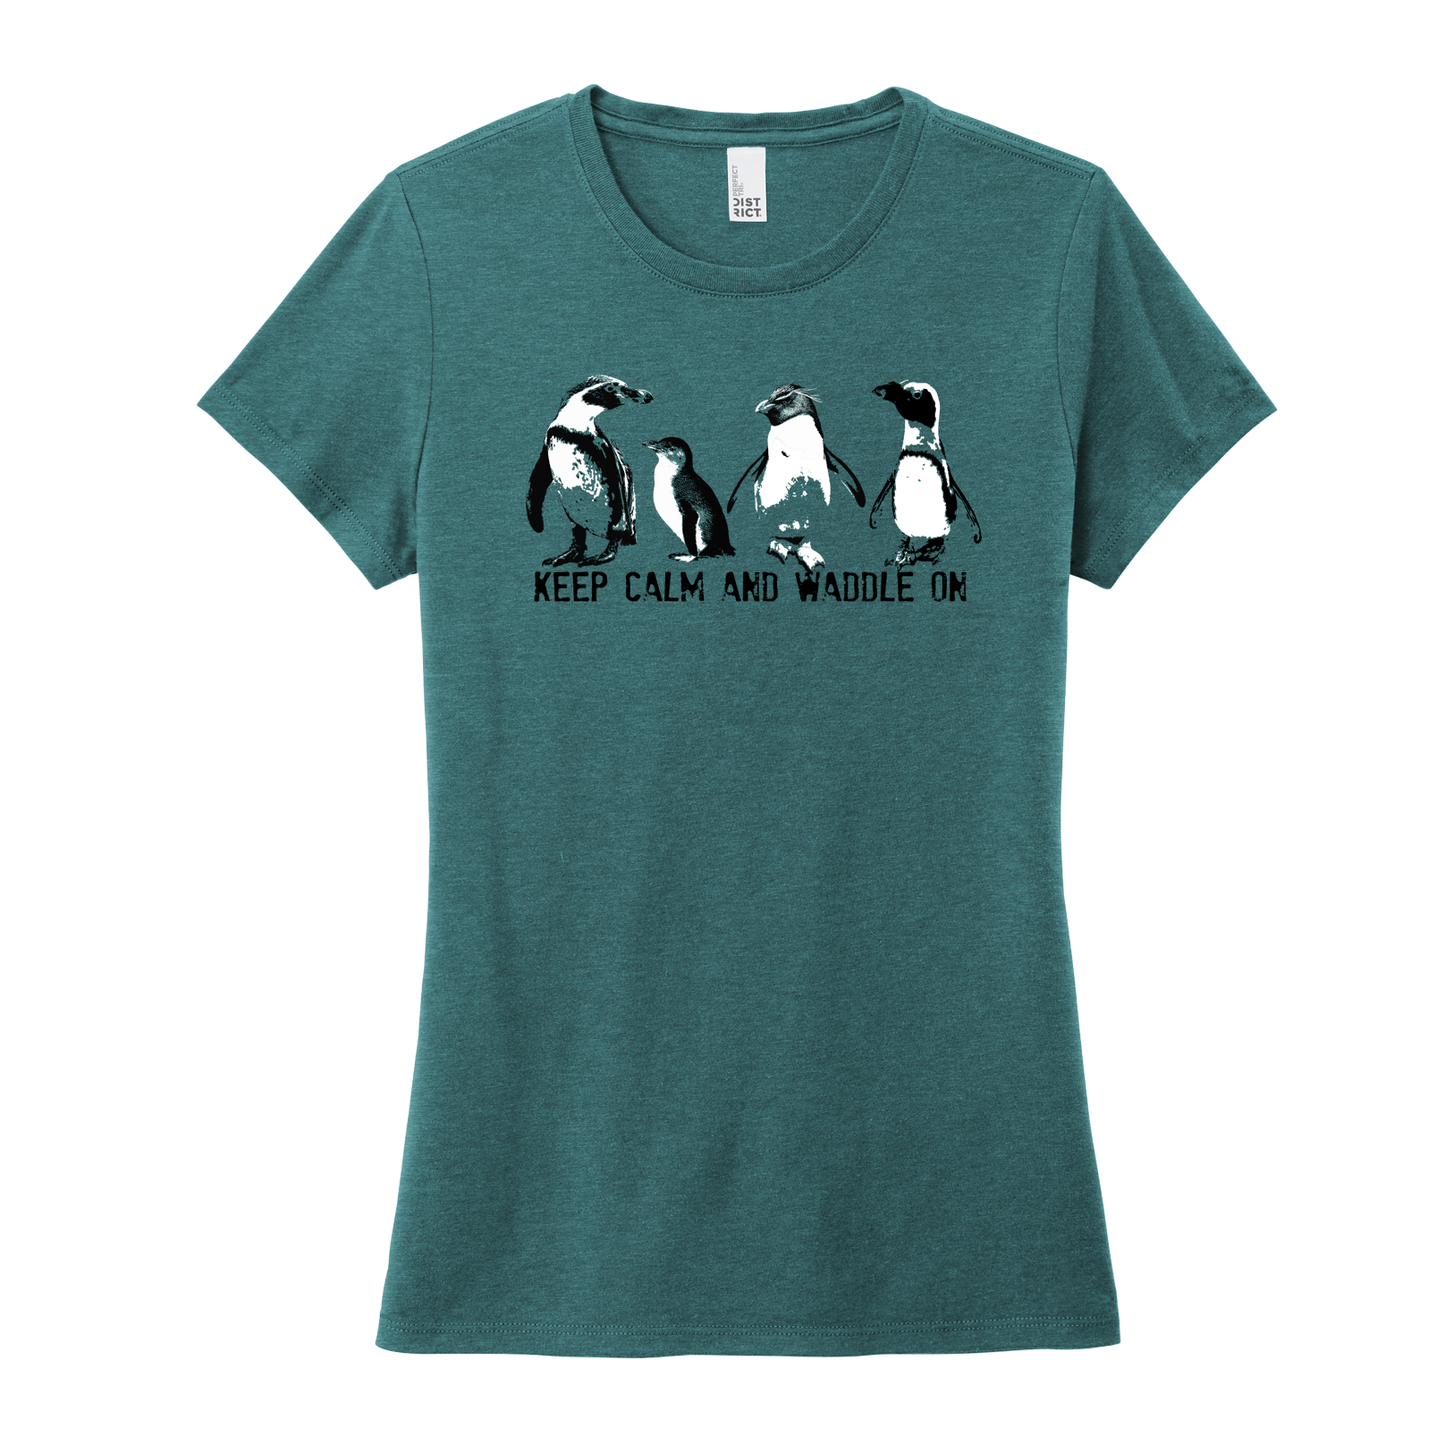 Penguins - Keep Calm and Waddle on - Women's Tee (Pre order)